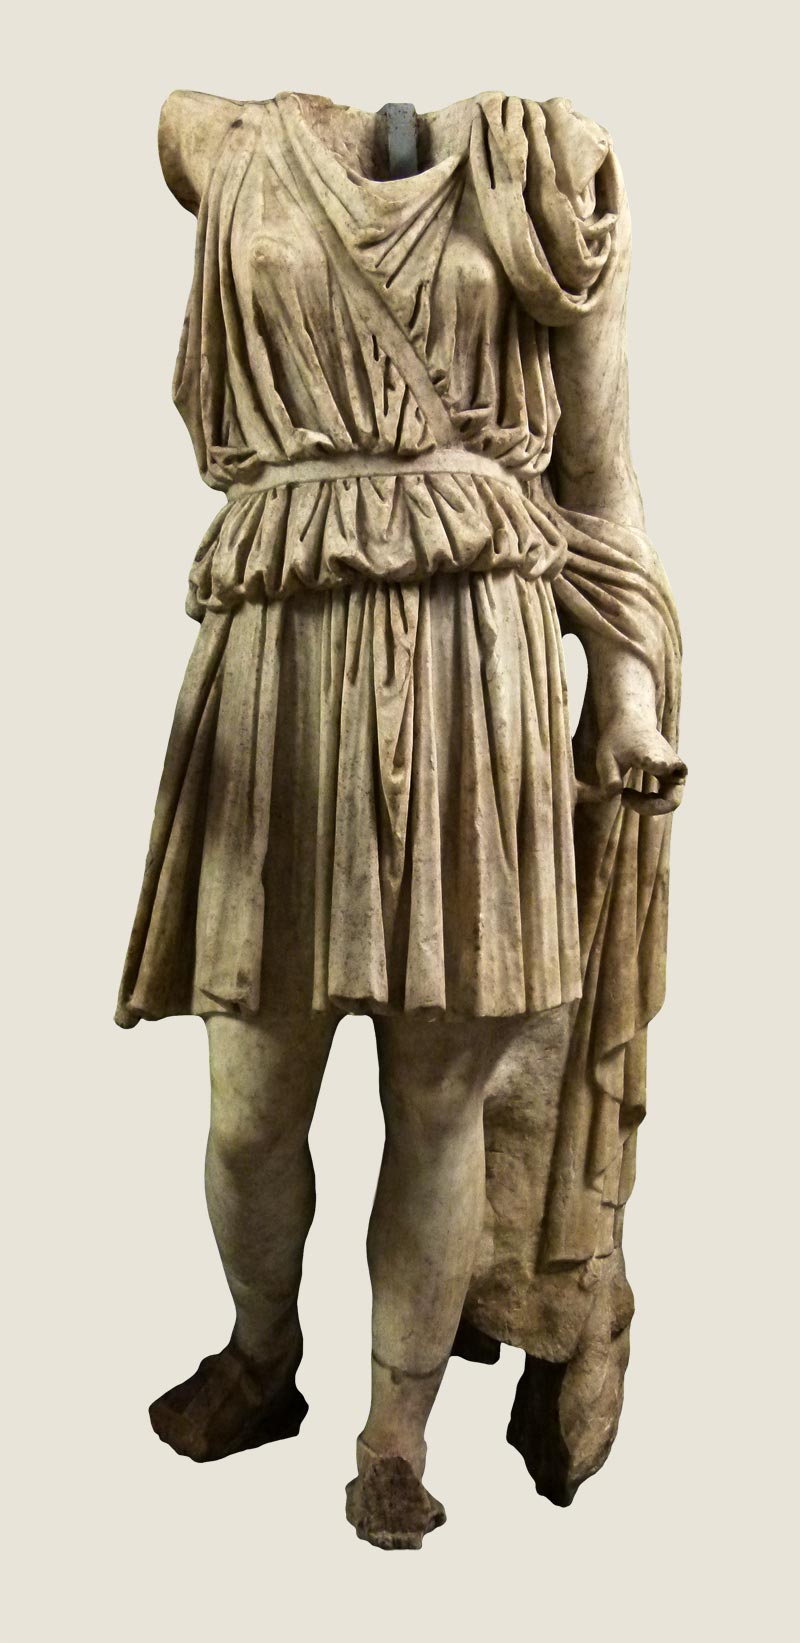 Statue of an athletic female figure